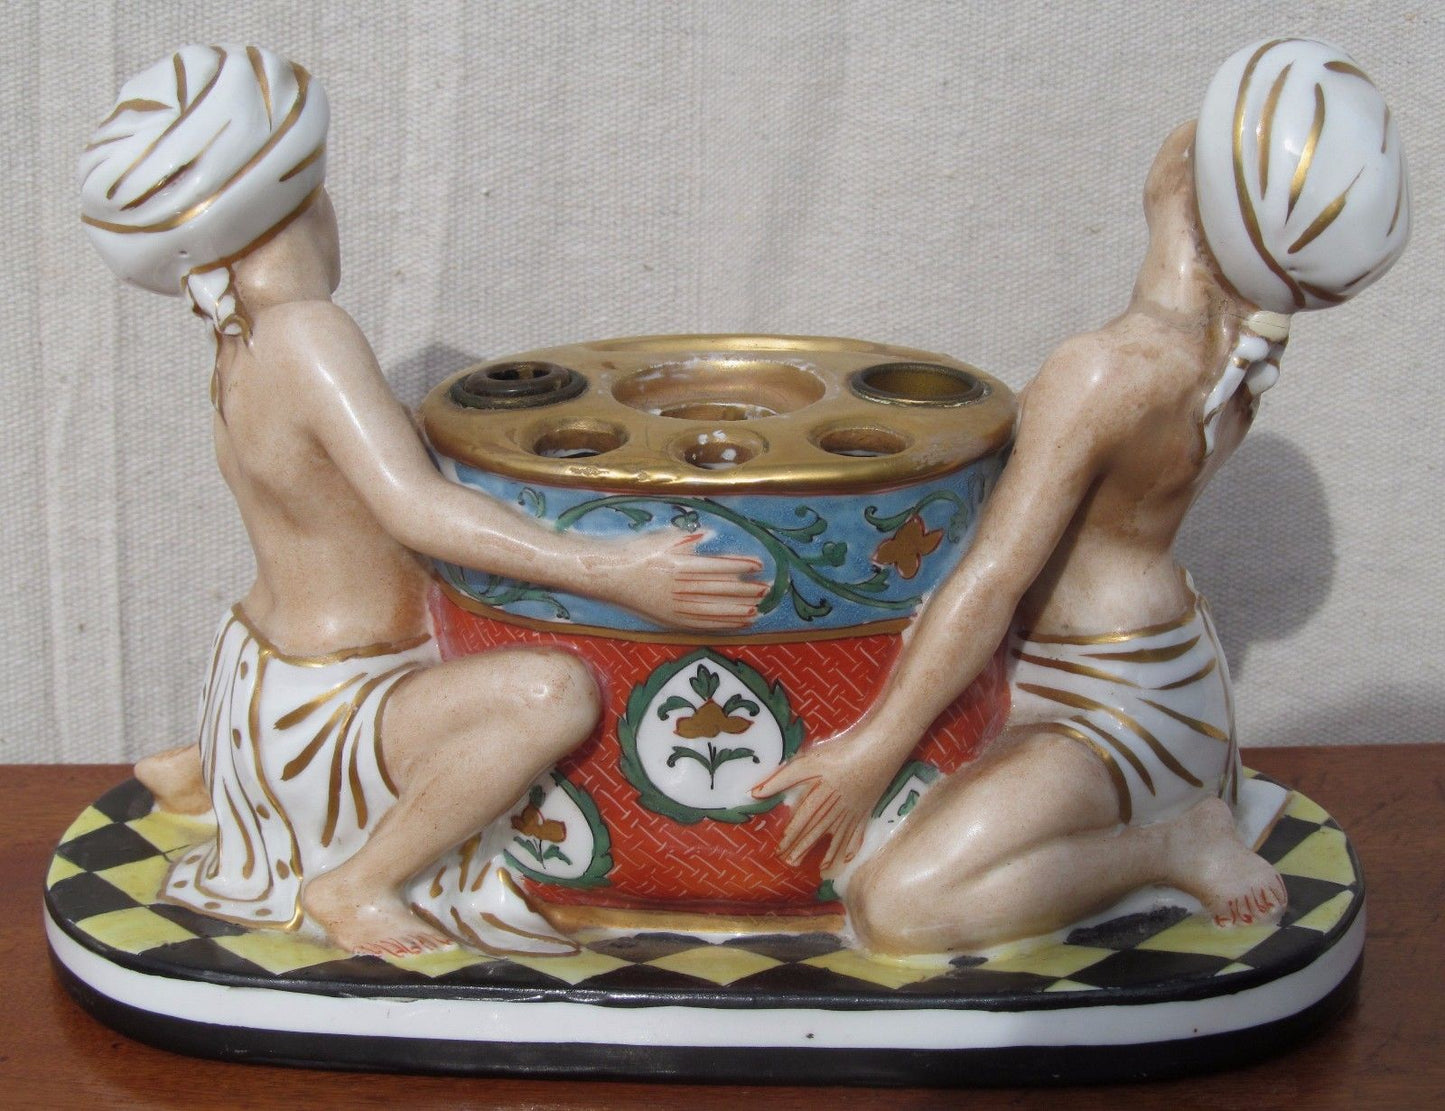 ANTIQUE ART NOUVEAU INKWELL WITH PERSIAN HAREM FIGURES